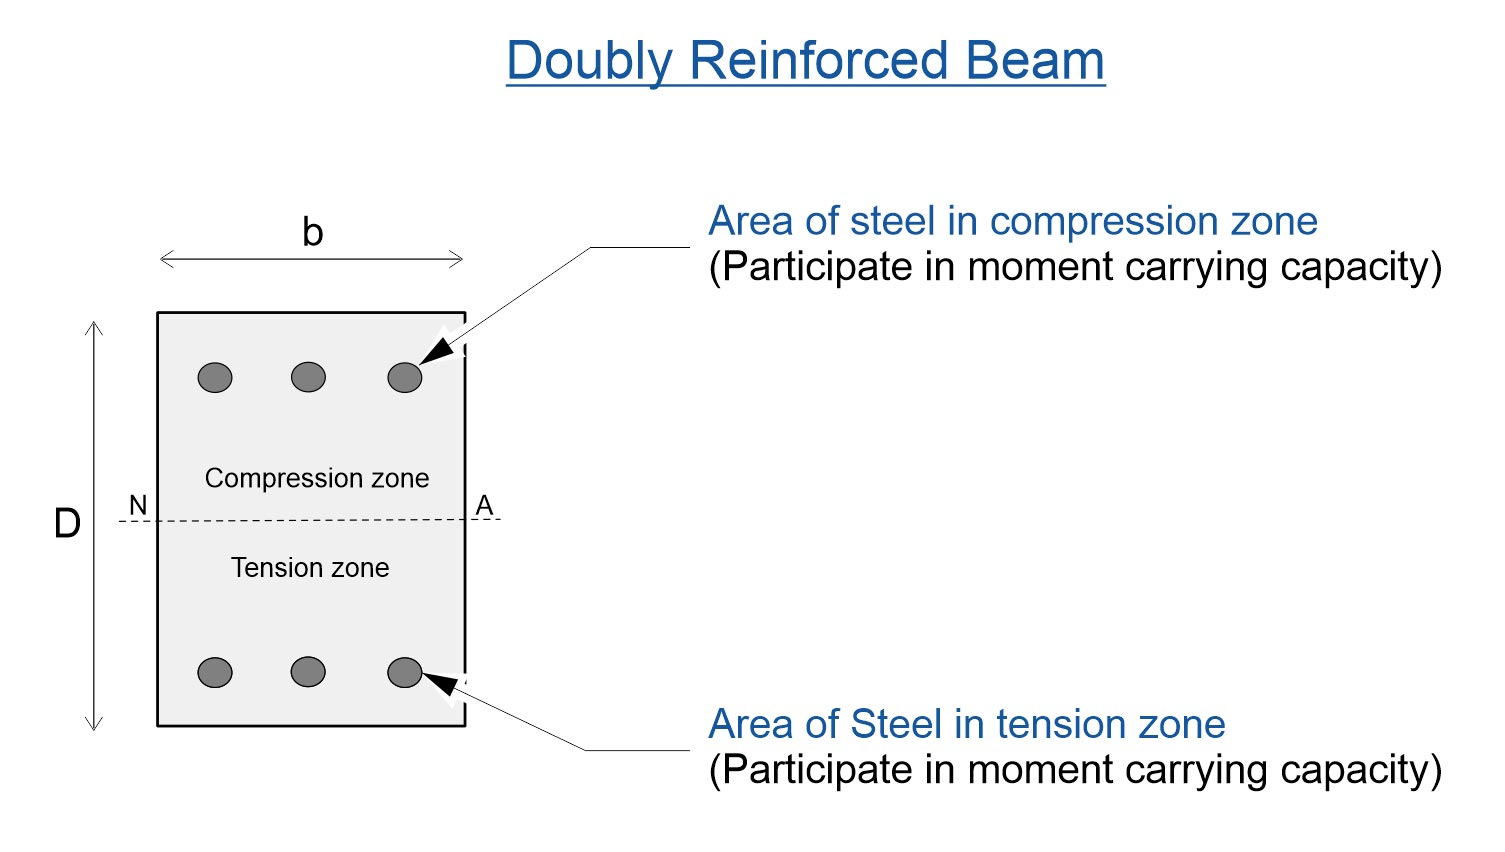 Doubly reinforced beam